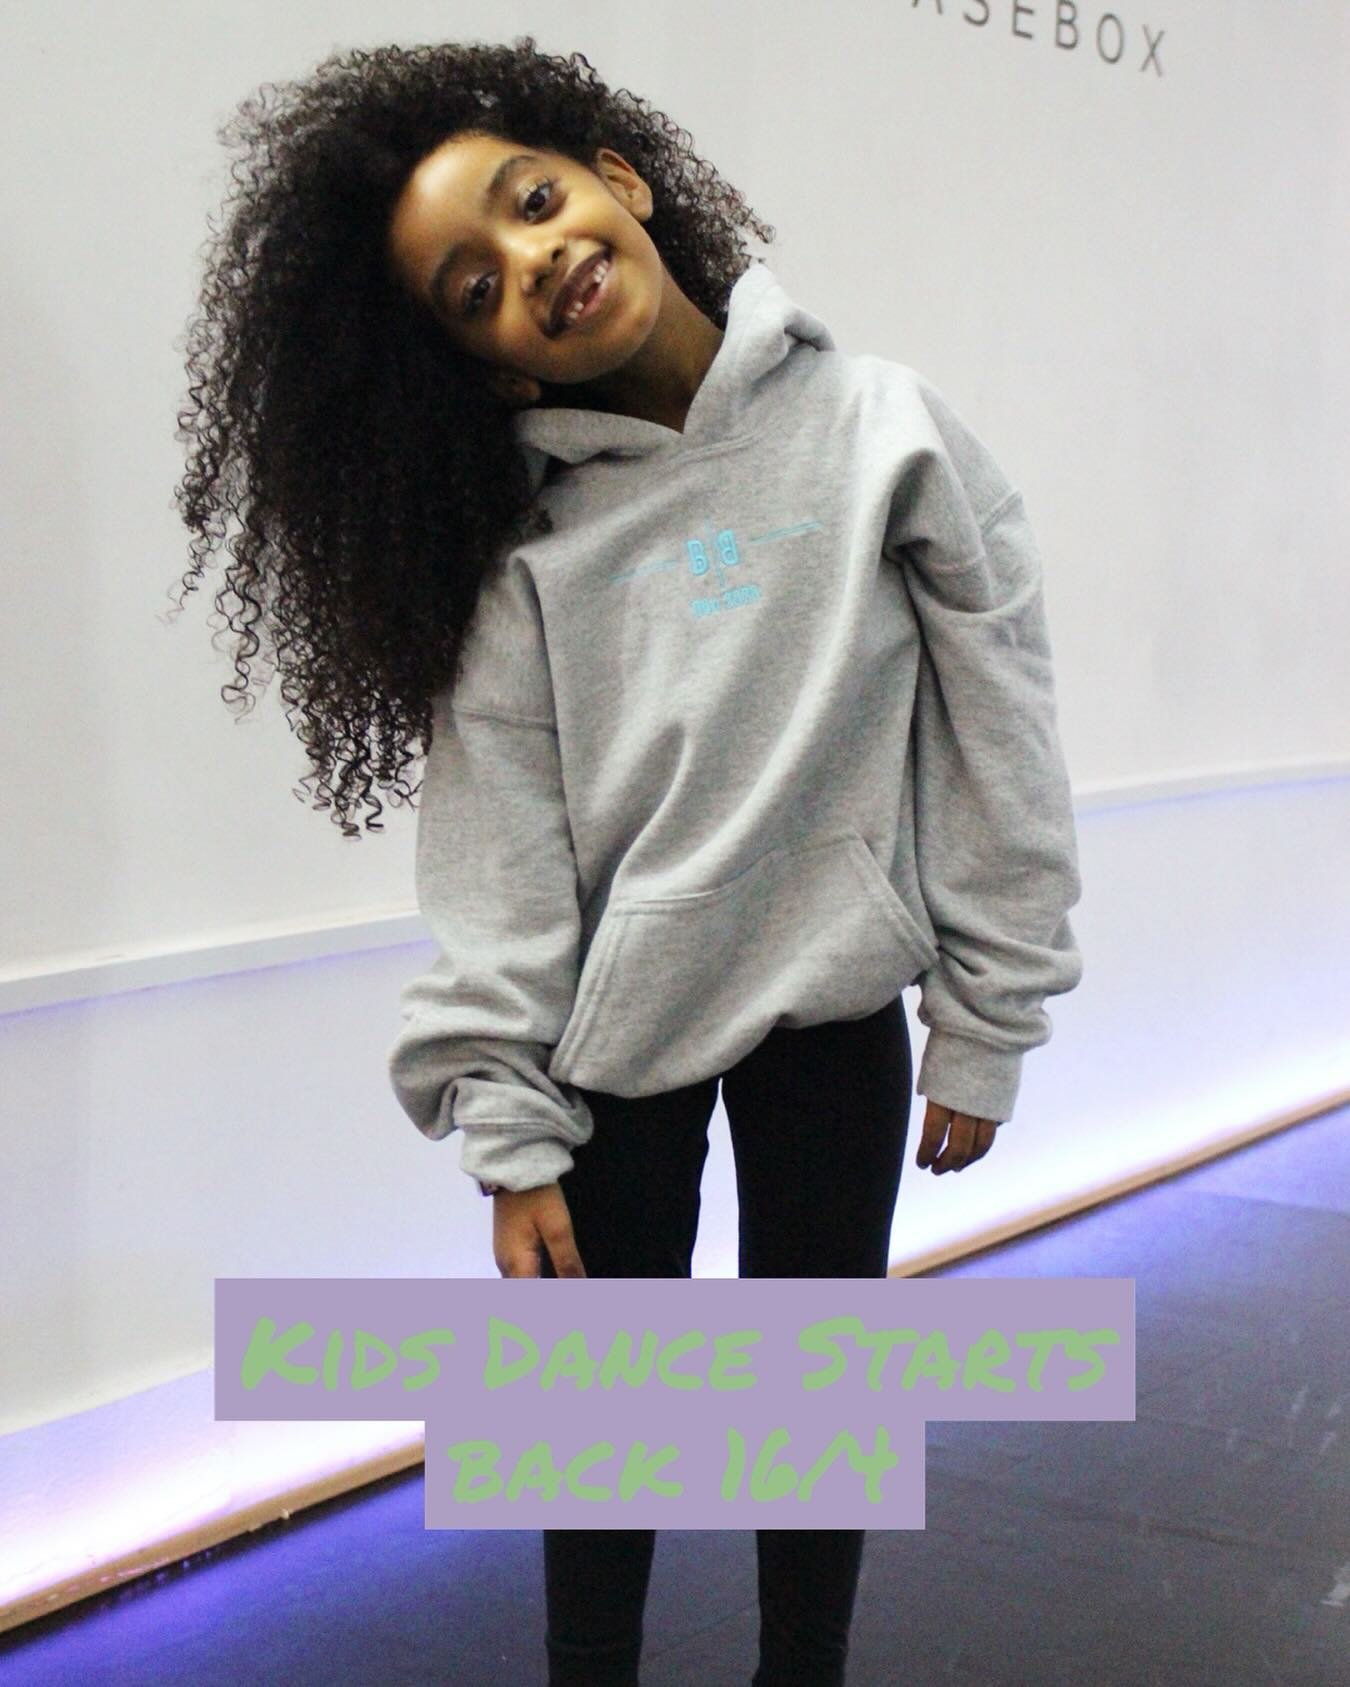 Full speed into the summer term! Our kids dance classes are back tonight! 
#teenstreetdance - Tuesdays 4.30-5.30pm
#kidsstreetdance (7-10yrs)- Sat 11-11.45am
#Lilstreet (4-6yrs) - Sat 11.45-12.15pm
#LilBallet (4-6yrs) - Sat 12.15-12.45pm